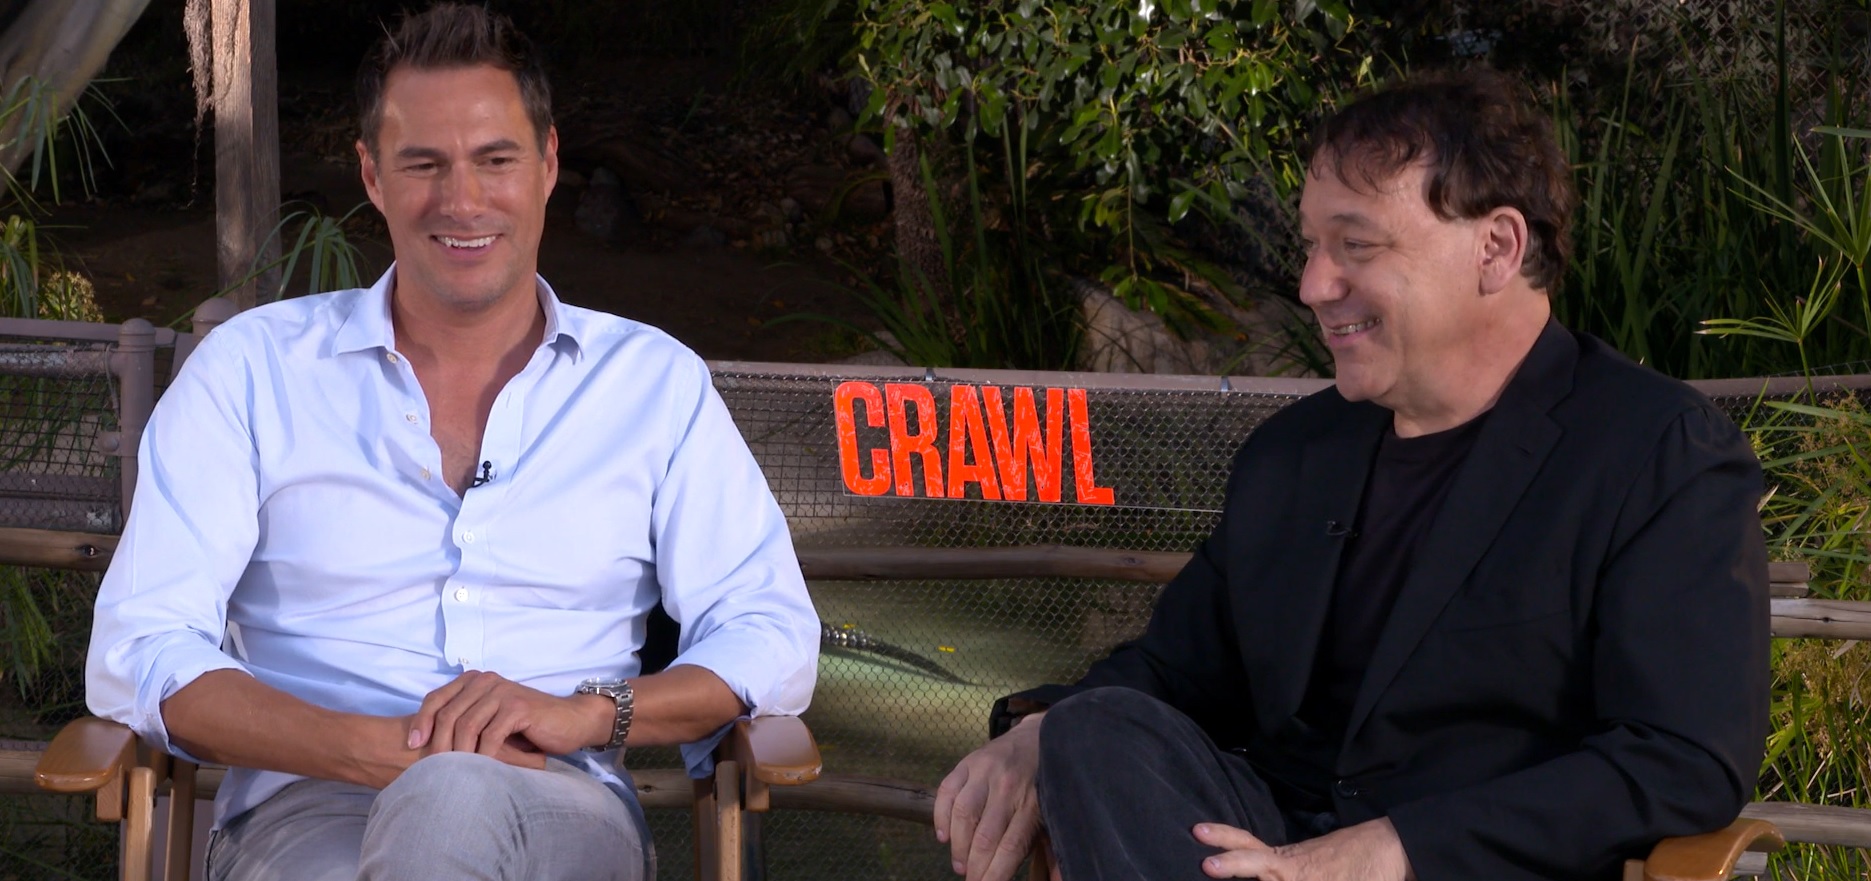 Crawl: Producers Craig J. Flores and Sam Raimi on Director and Cast Selection for Gator Horror